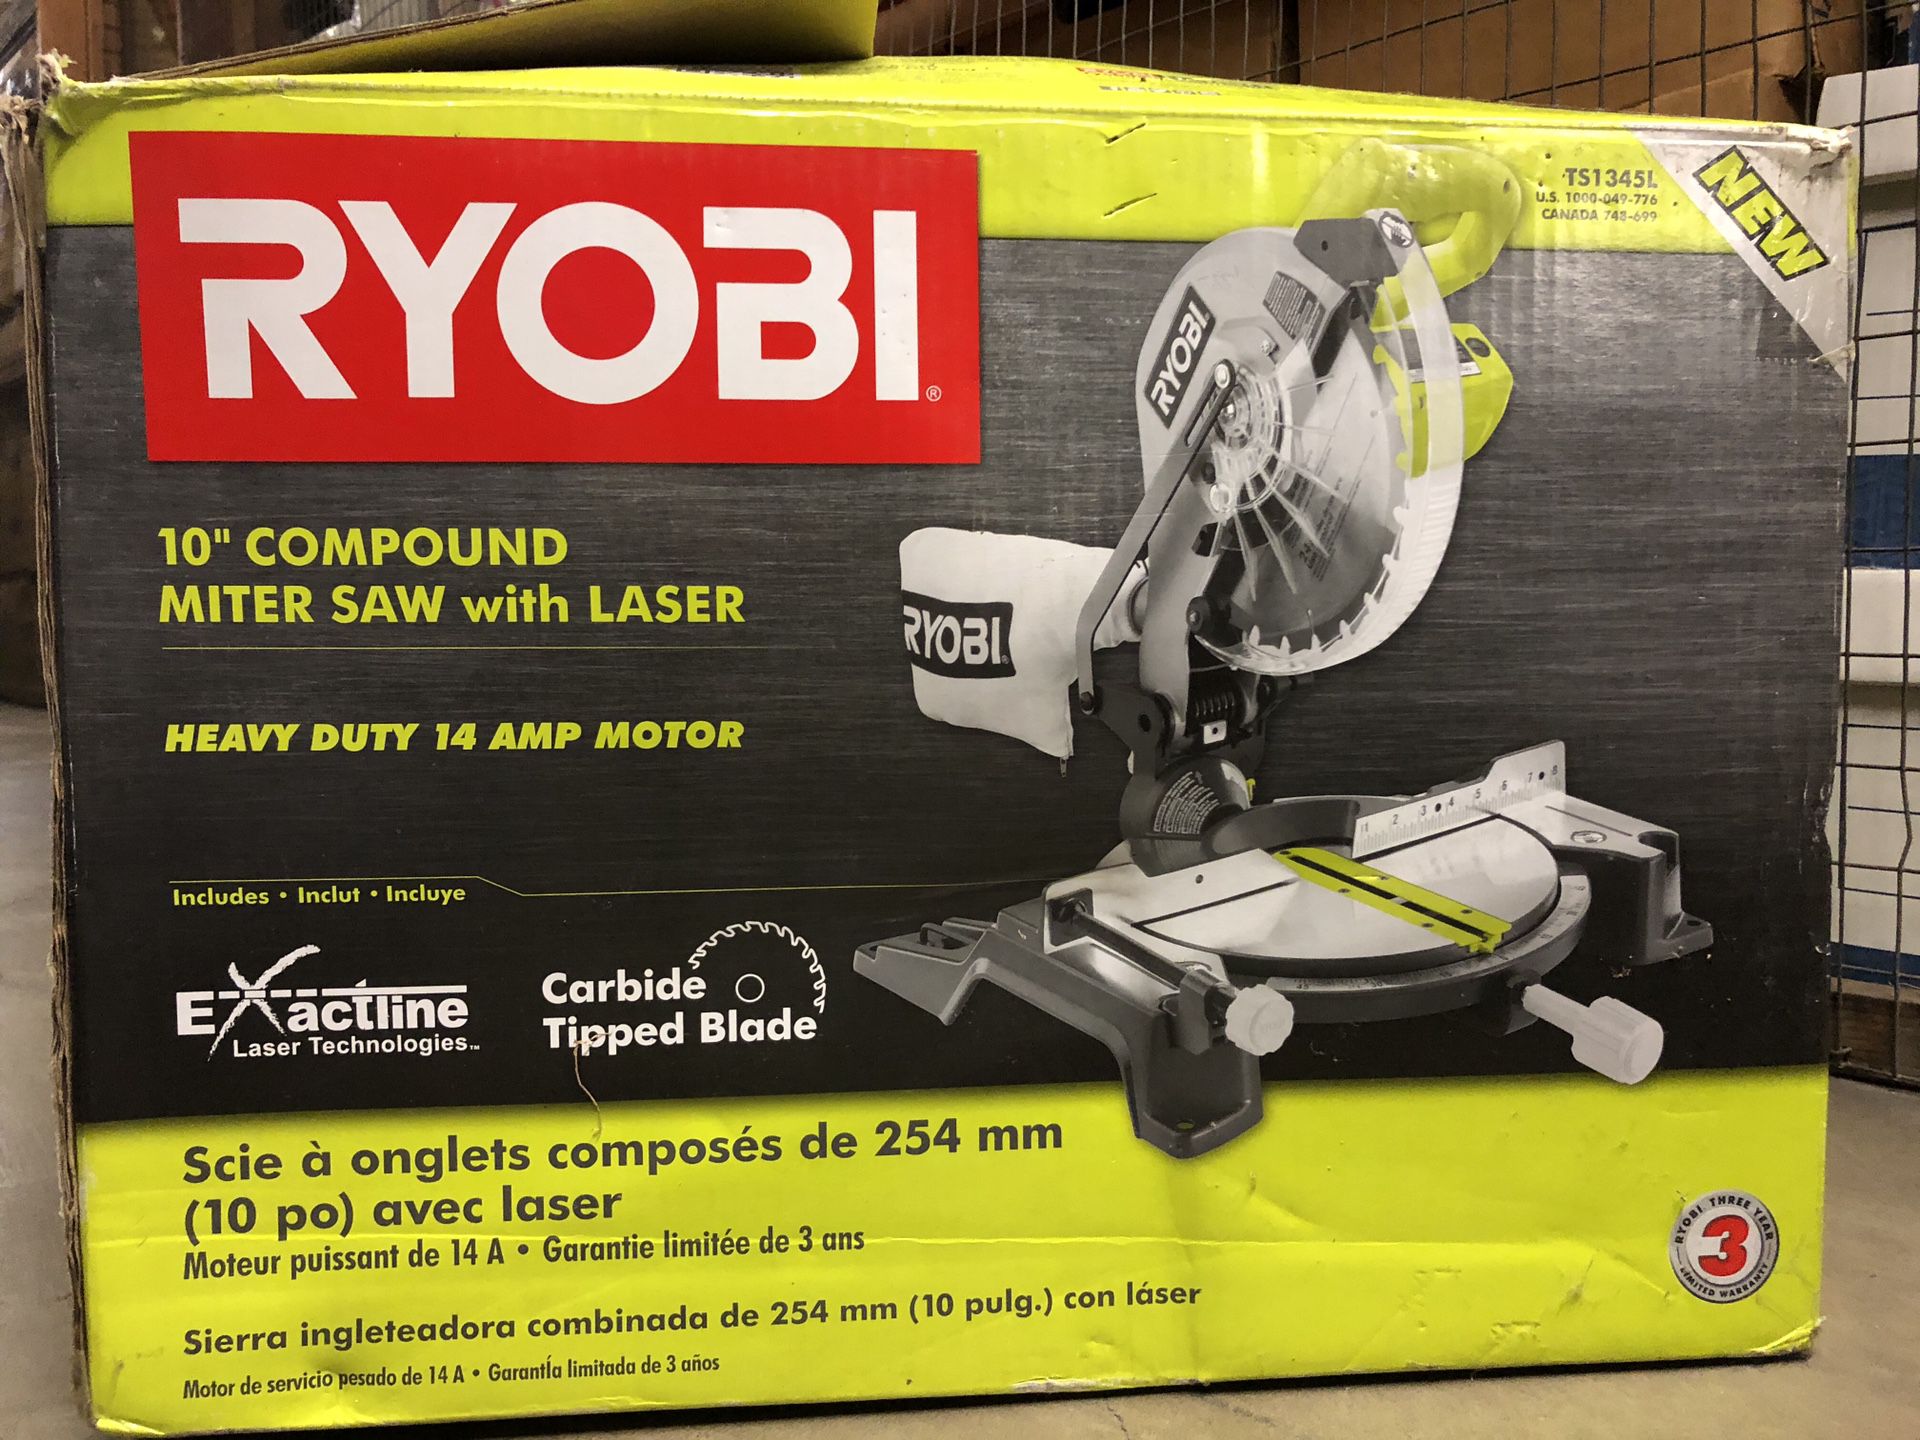 Hot price, Ryobi Mitter Saw with Laser for $75